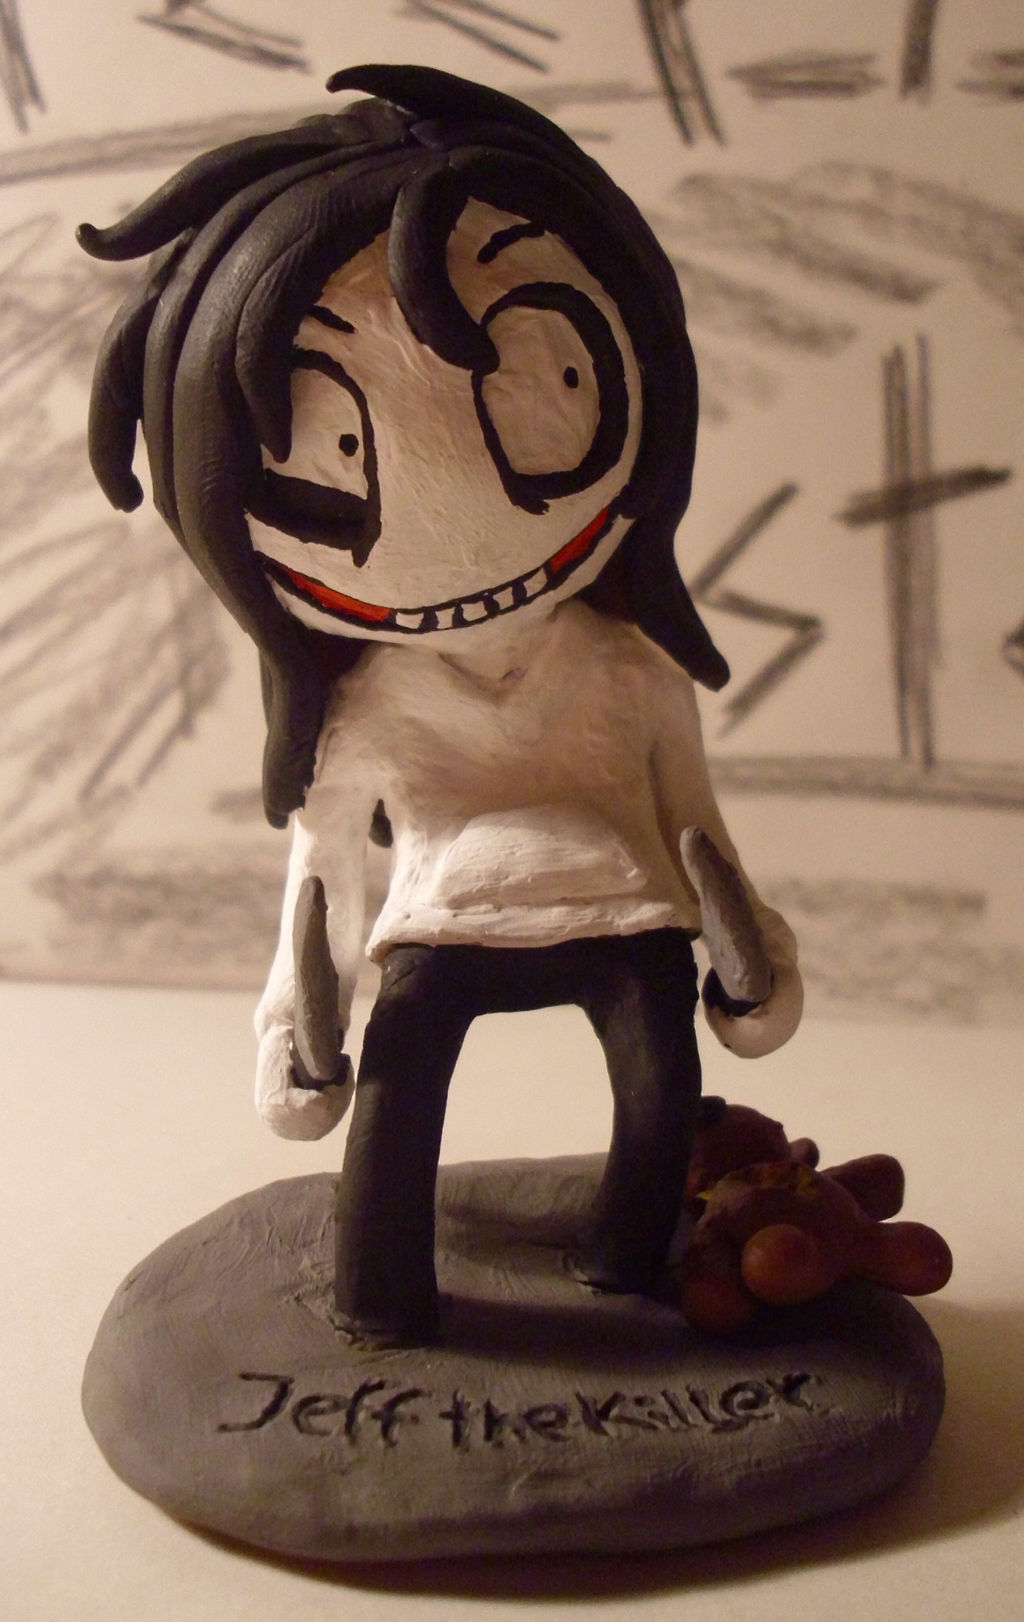 Jeff the Killer - these eyes by SnuffBomb on deviantART in 2023